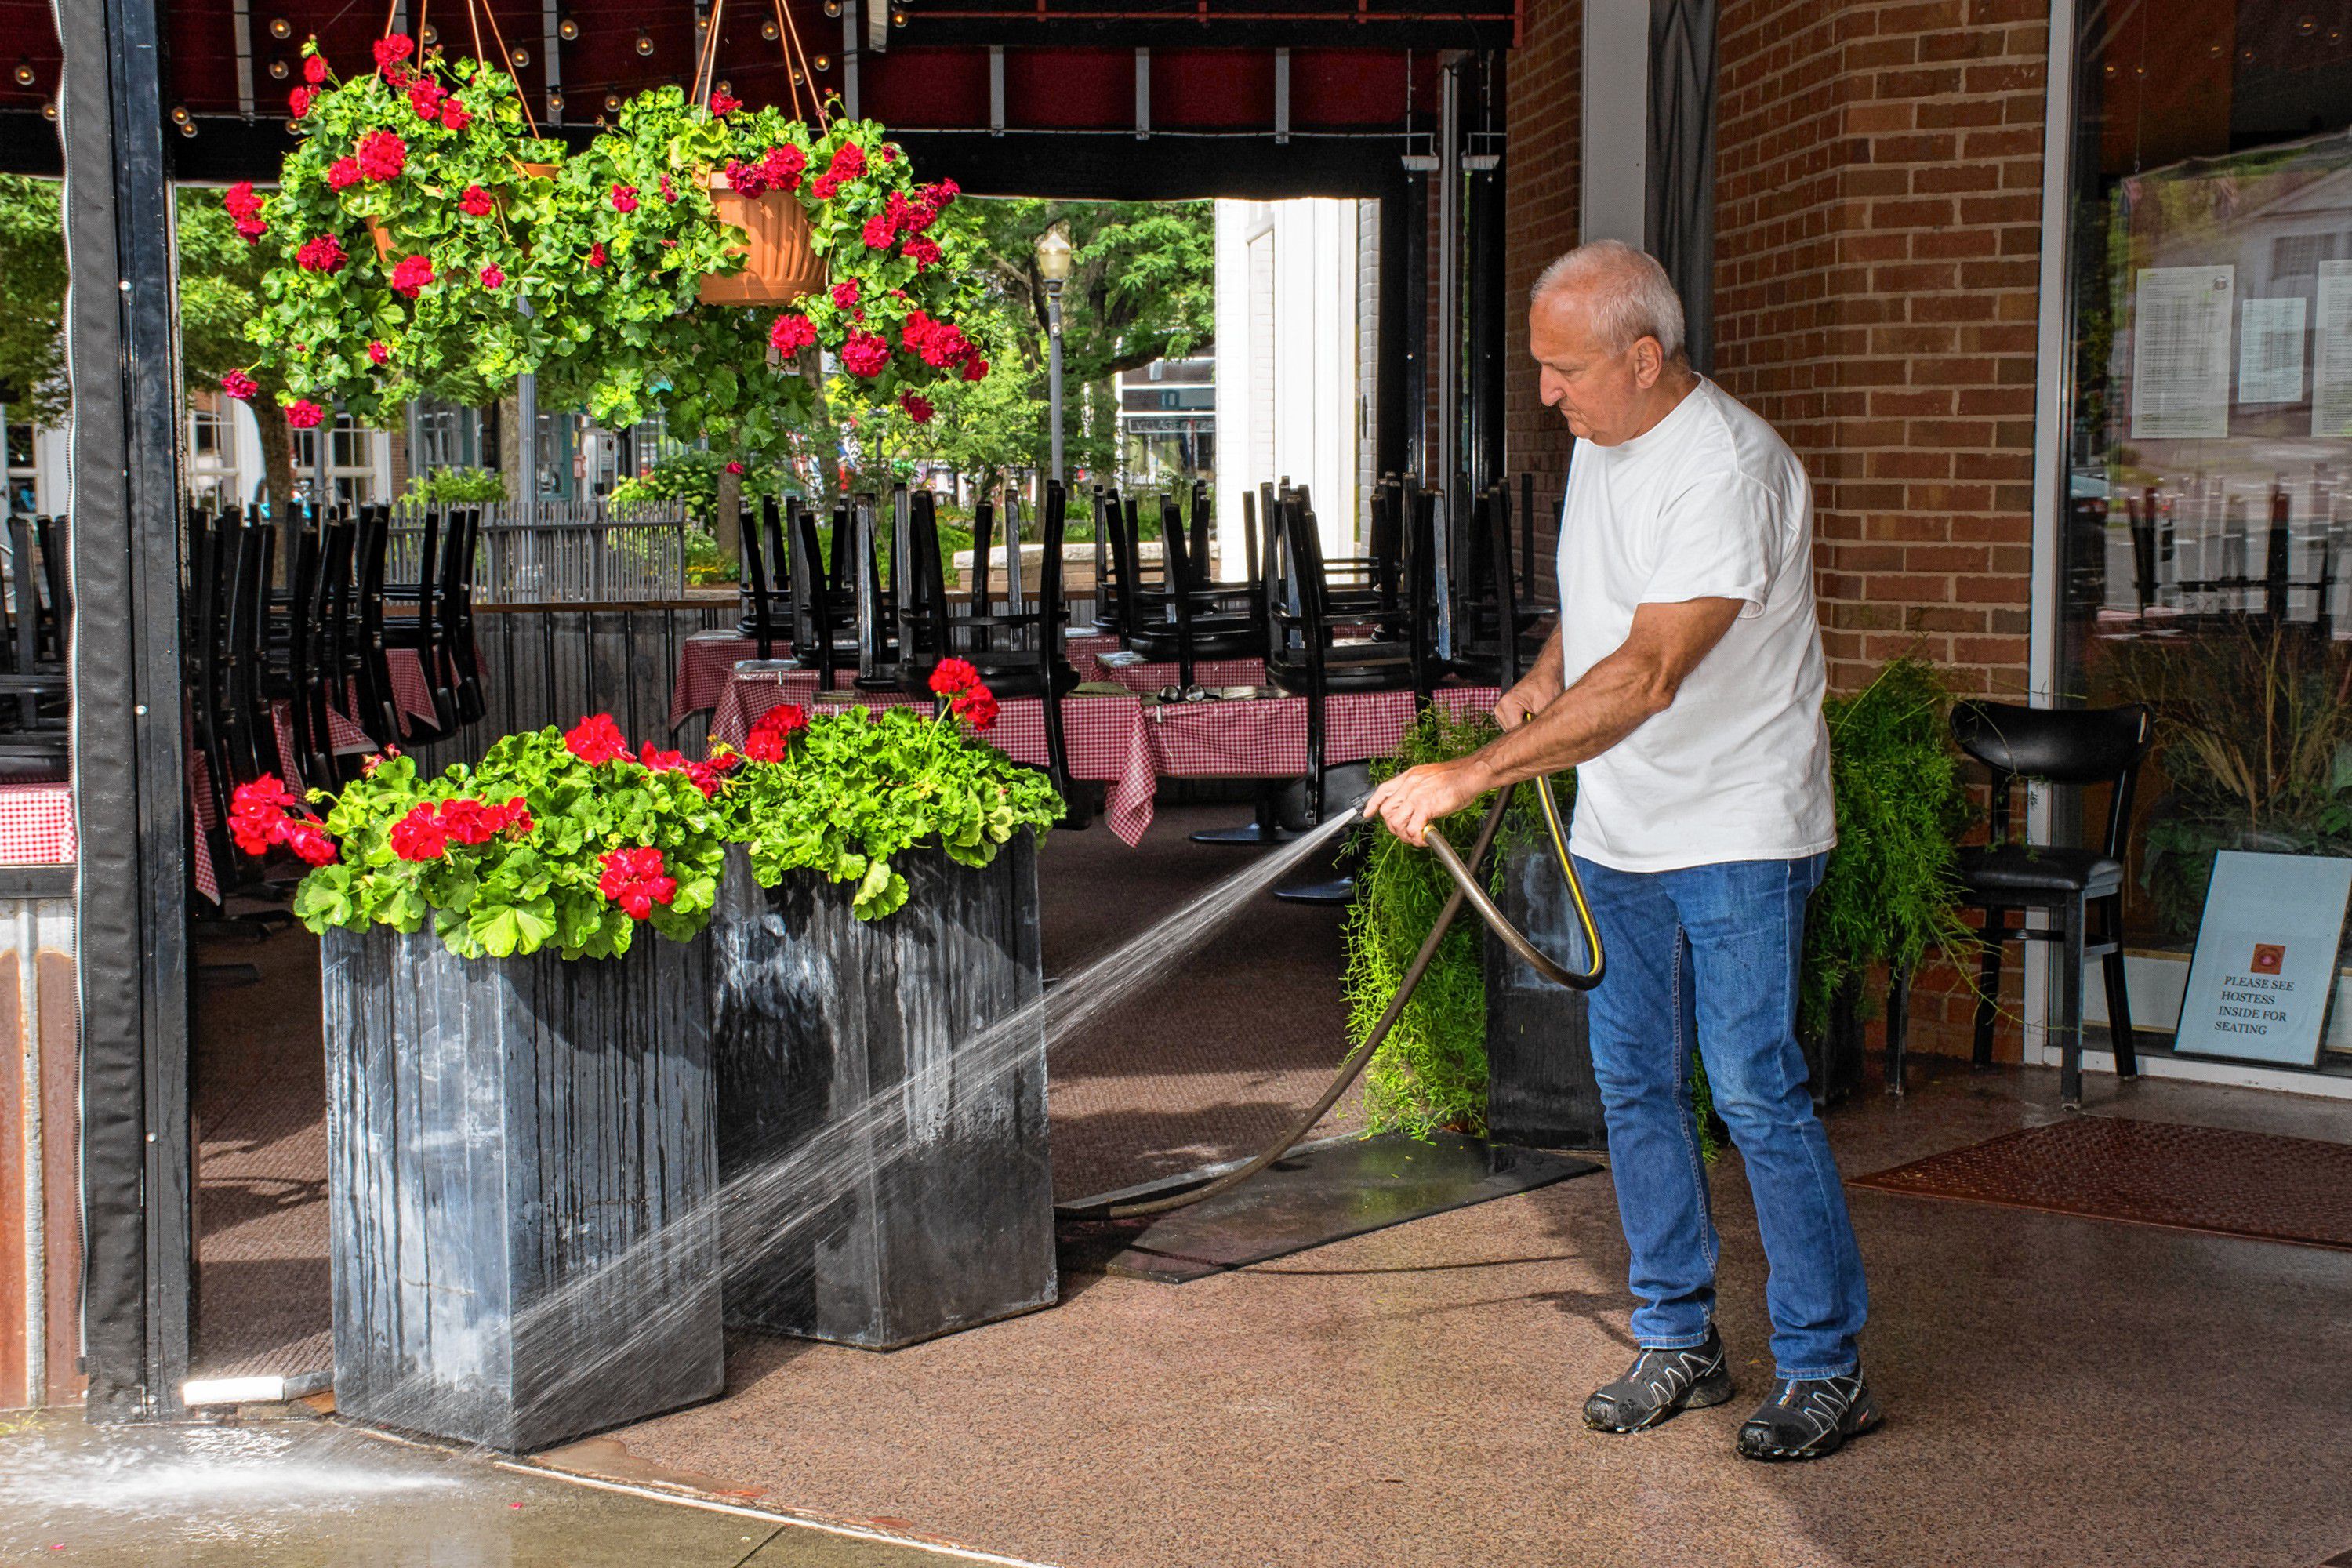 Robert Meyers, owner of Three Tomatoes Trattoria in Lebanon, N.H., washes down the sidewalk before opening for lunch -- just like restaurants in the old country. (Nancy Nutile-McMenemy photograph)